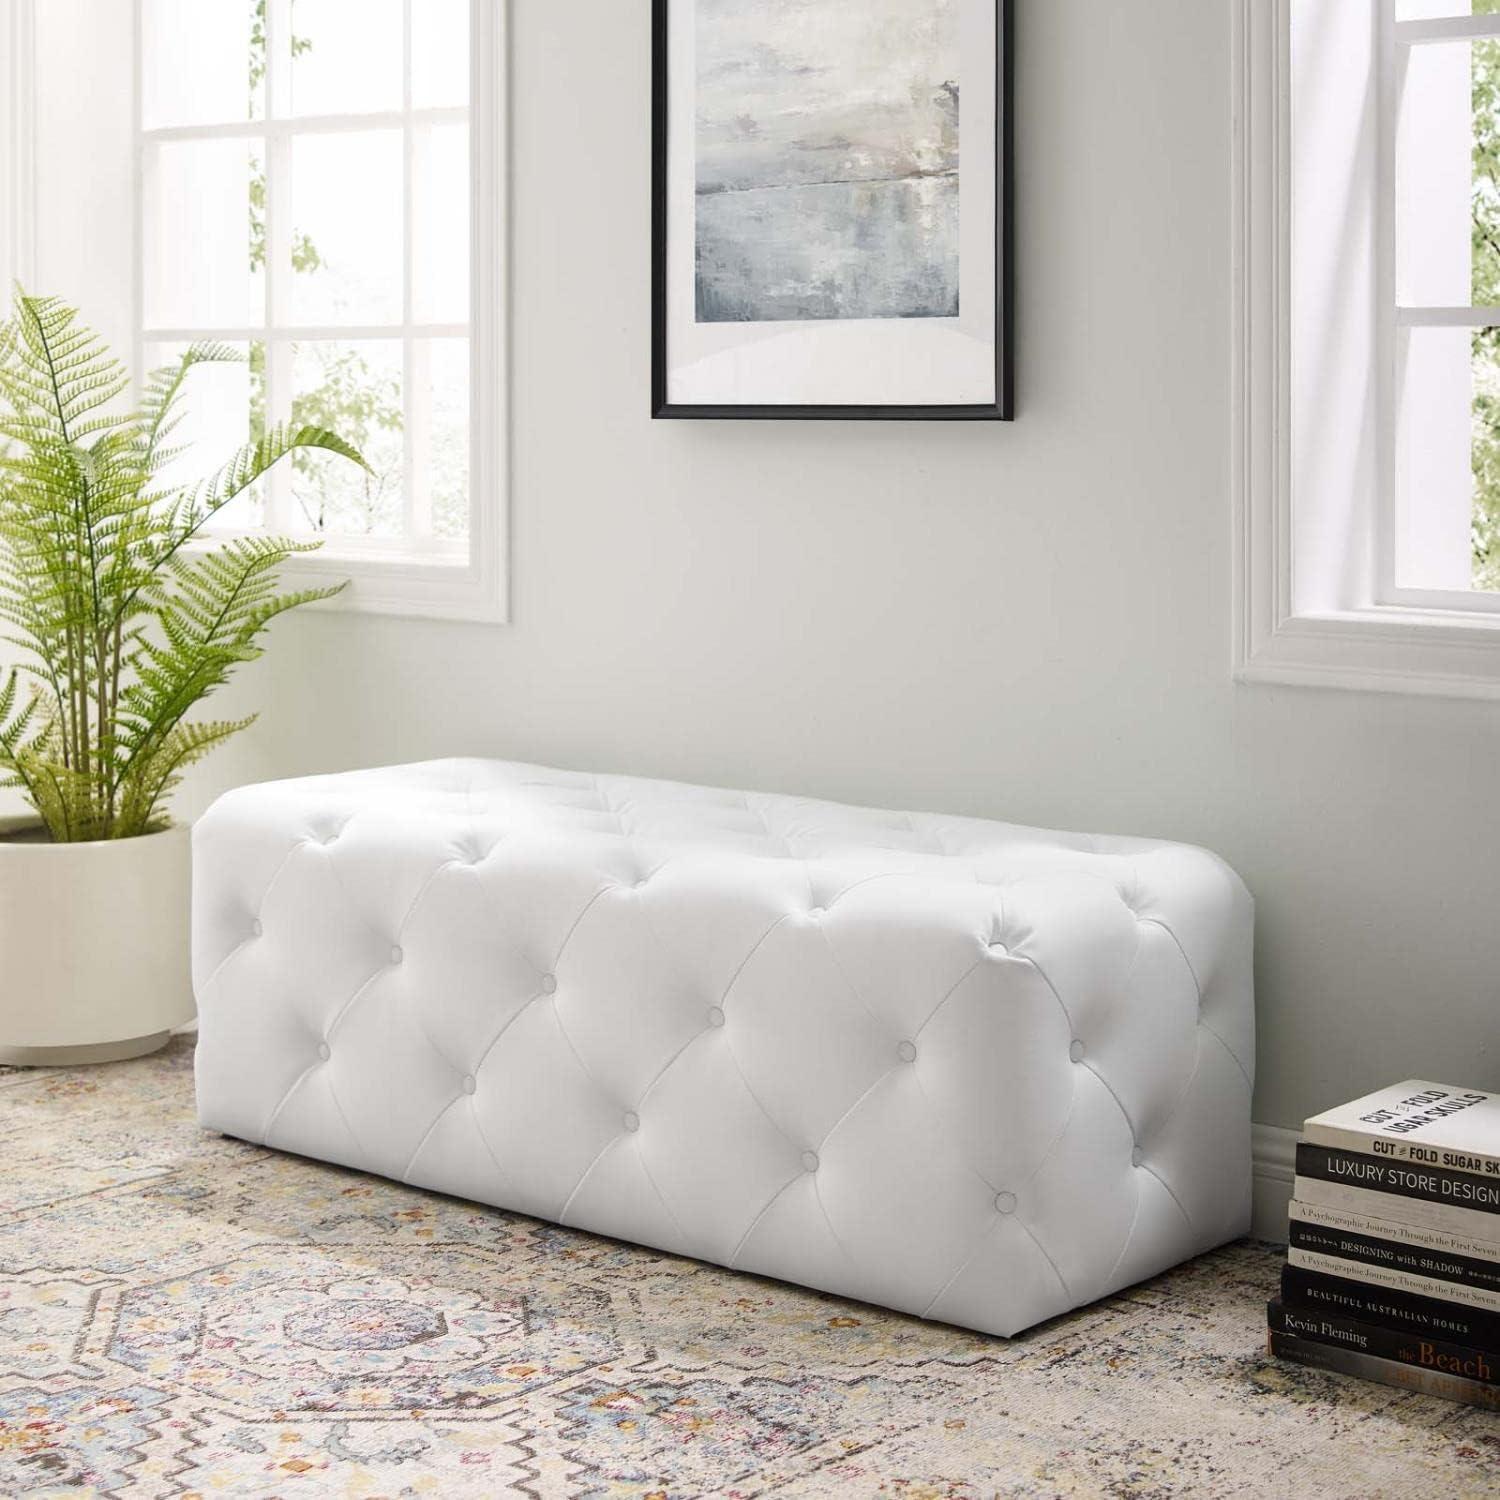 48" Luxe White Faux Leather Tufted Entryway Bench